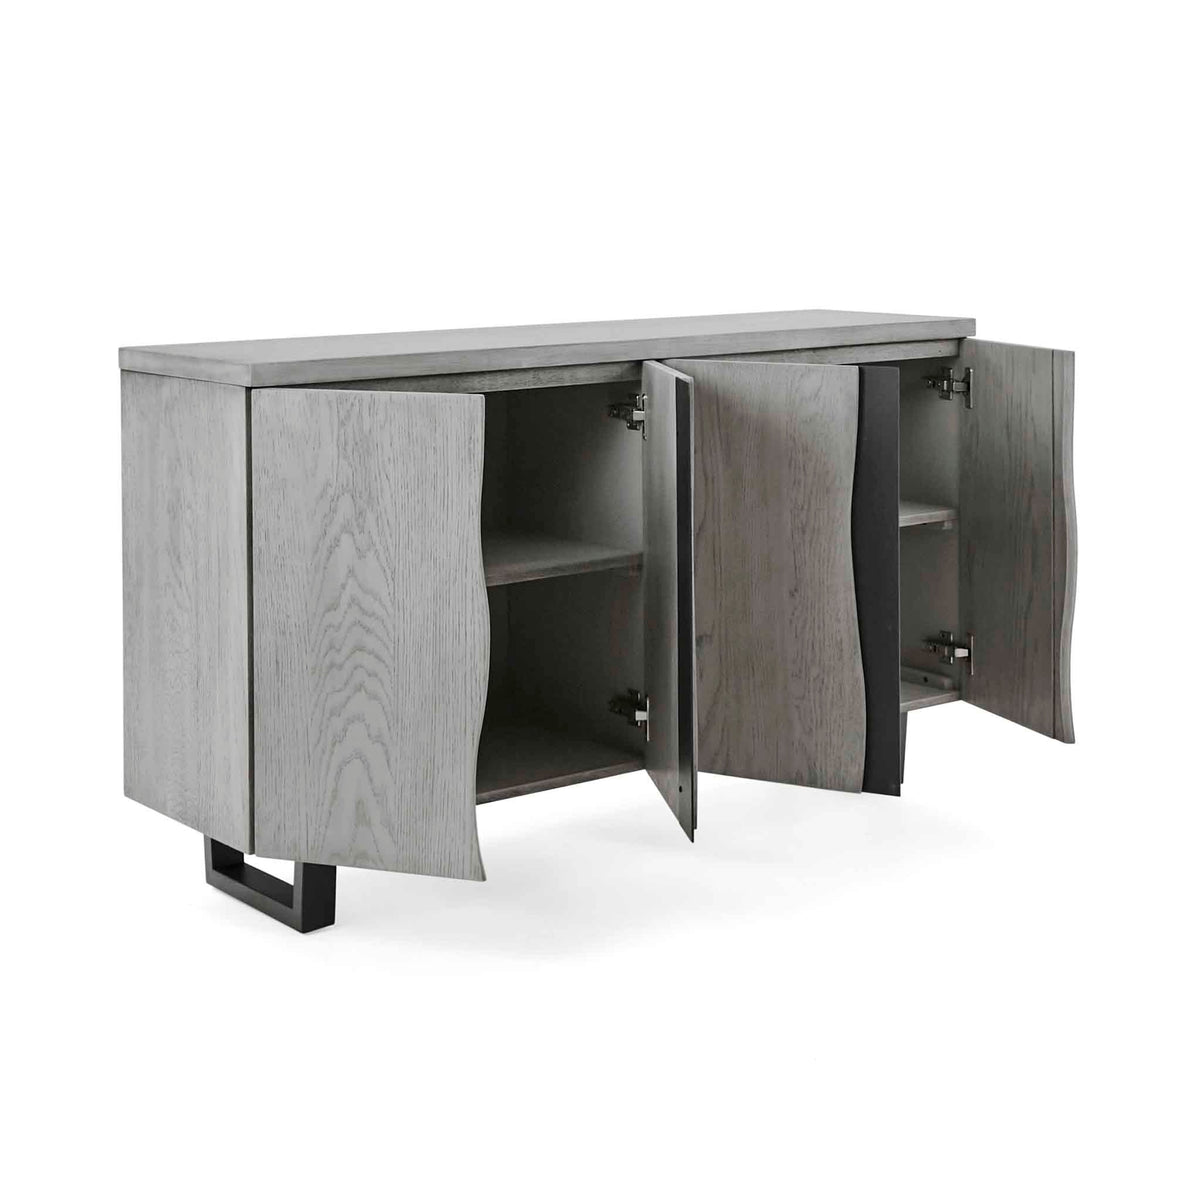 Soho Large Sideboard - Side view with cupboard doors opening